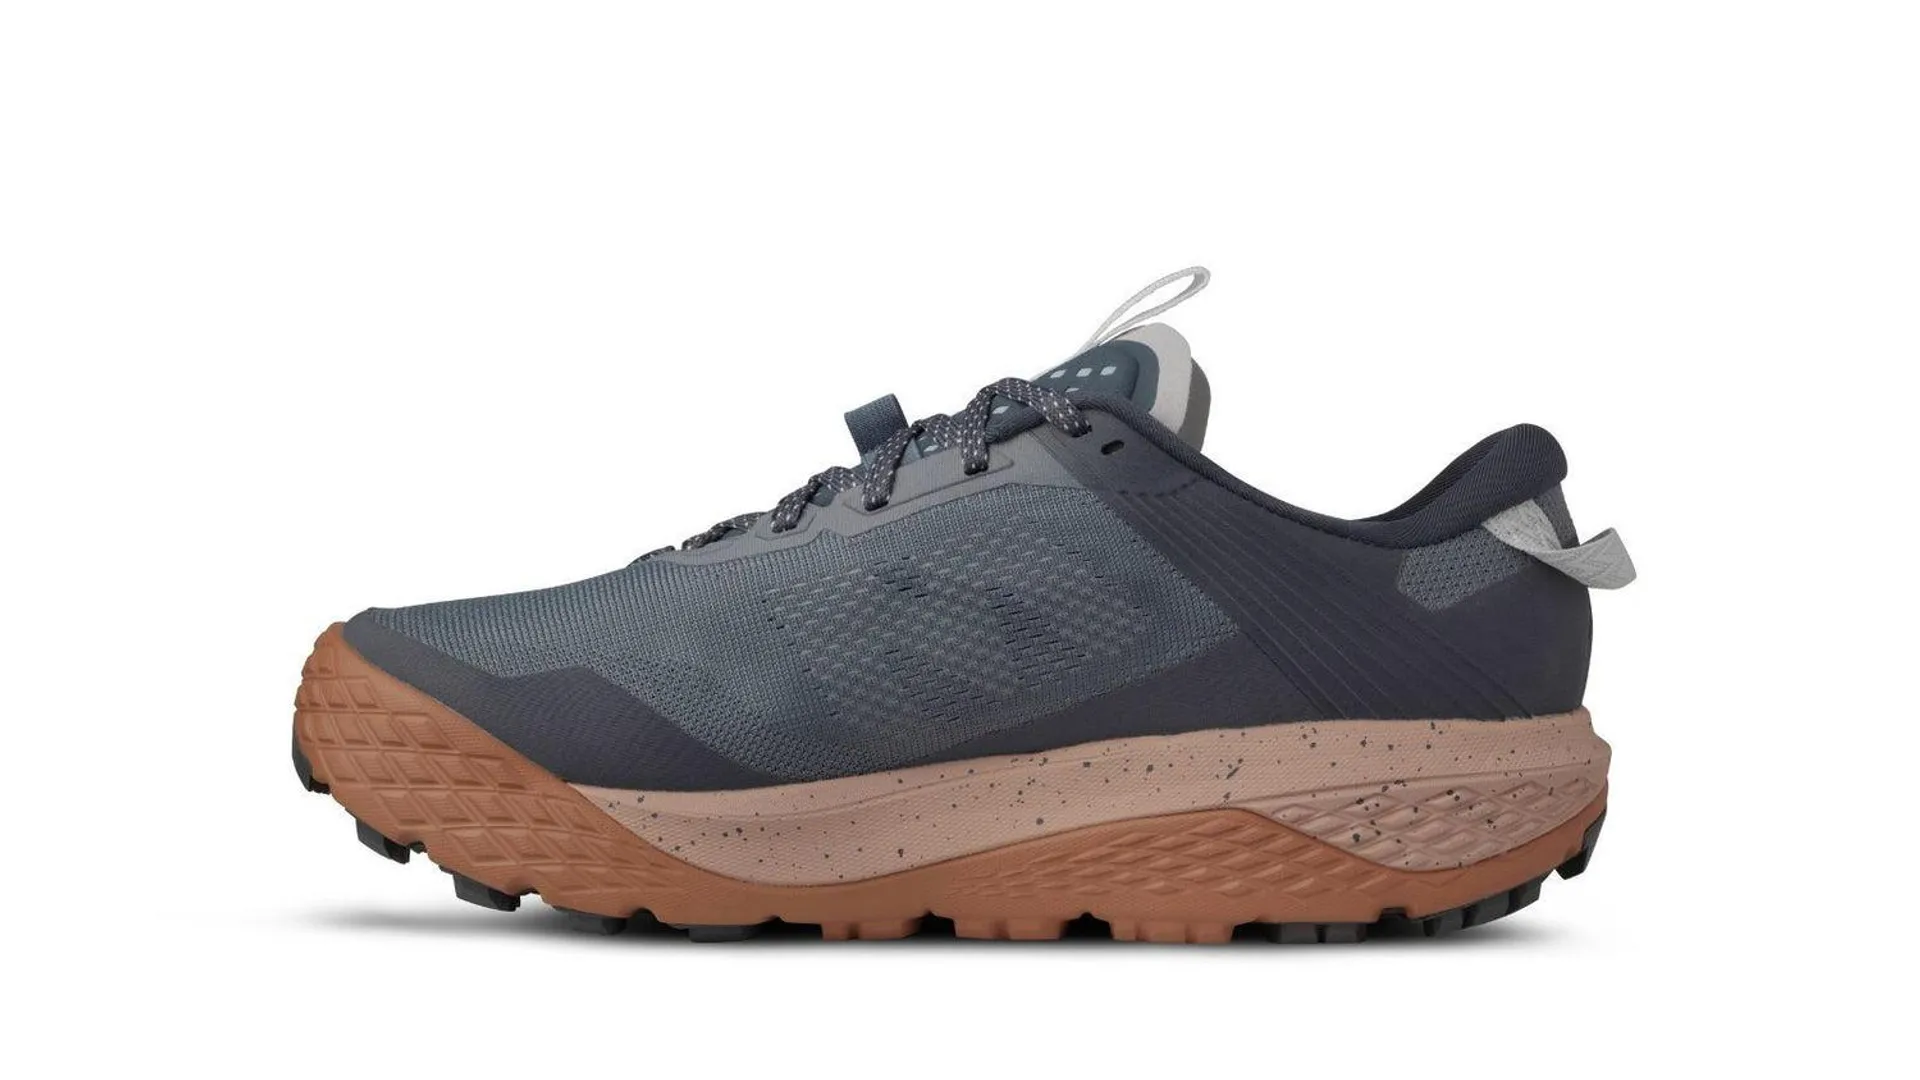 WOMEN'S IKONI TRAIL 1.0 STORMY WEATHER / RUGBY TAN